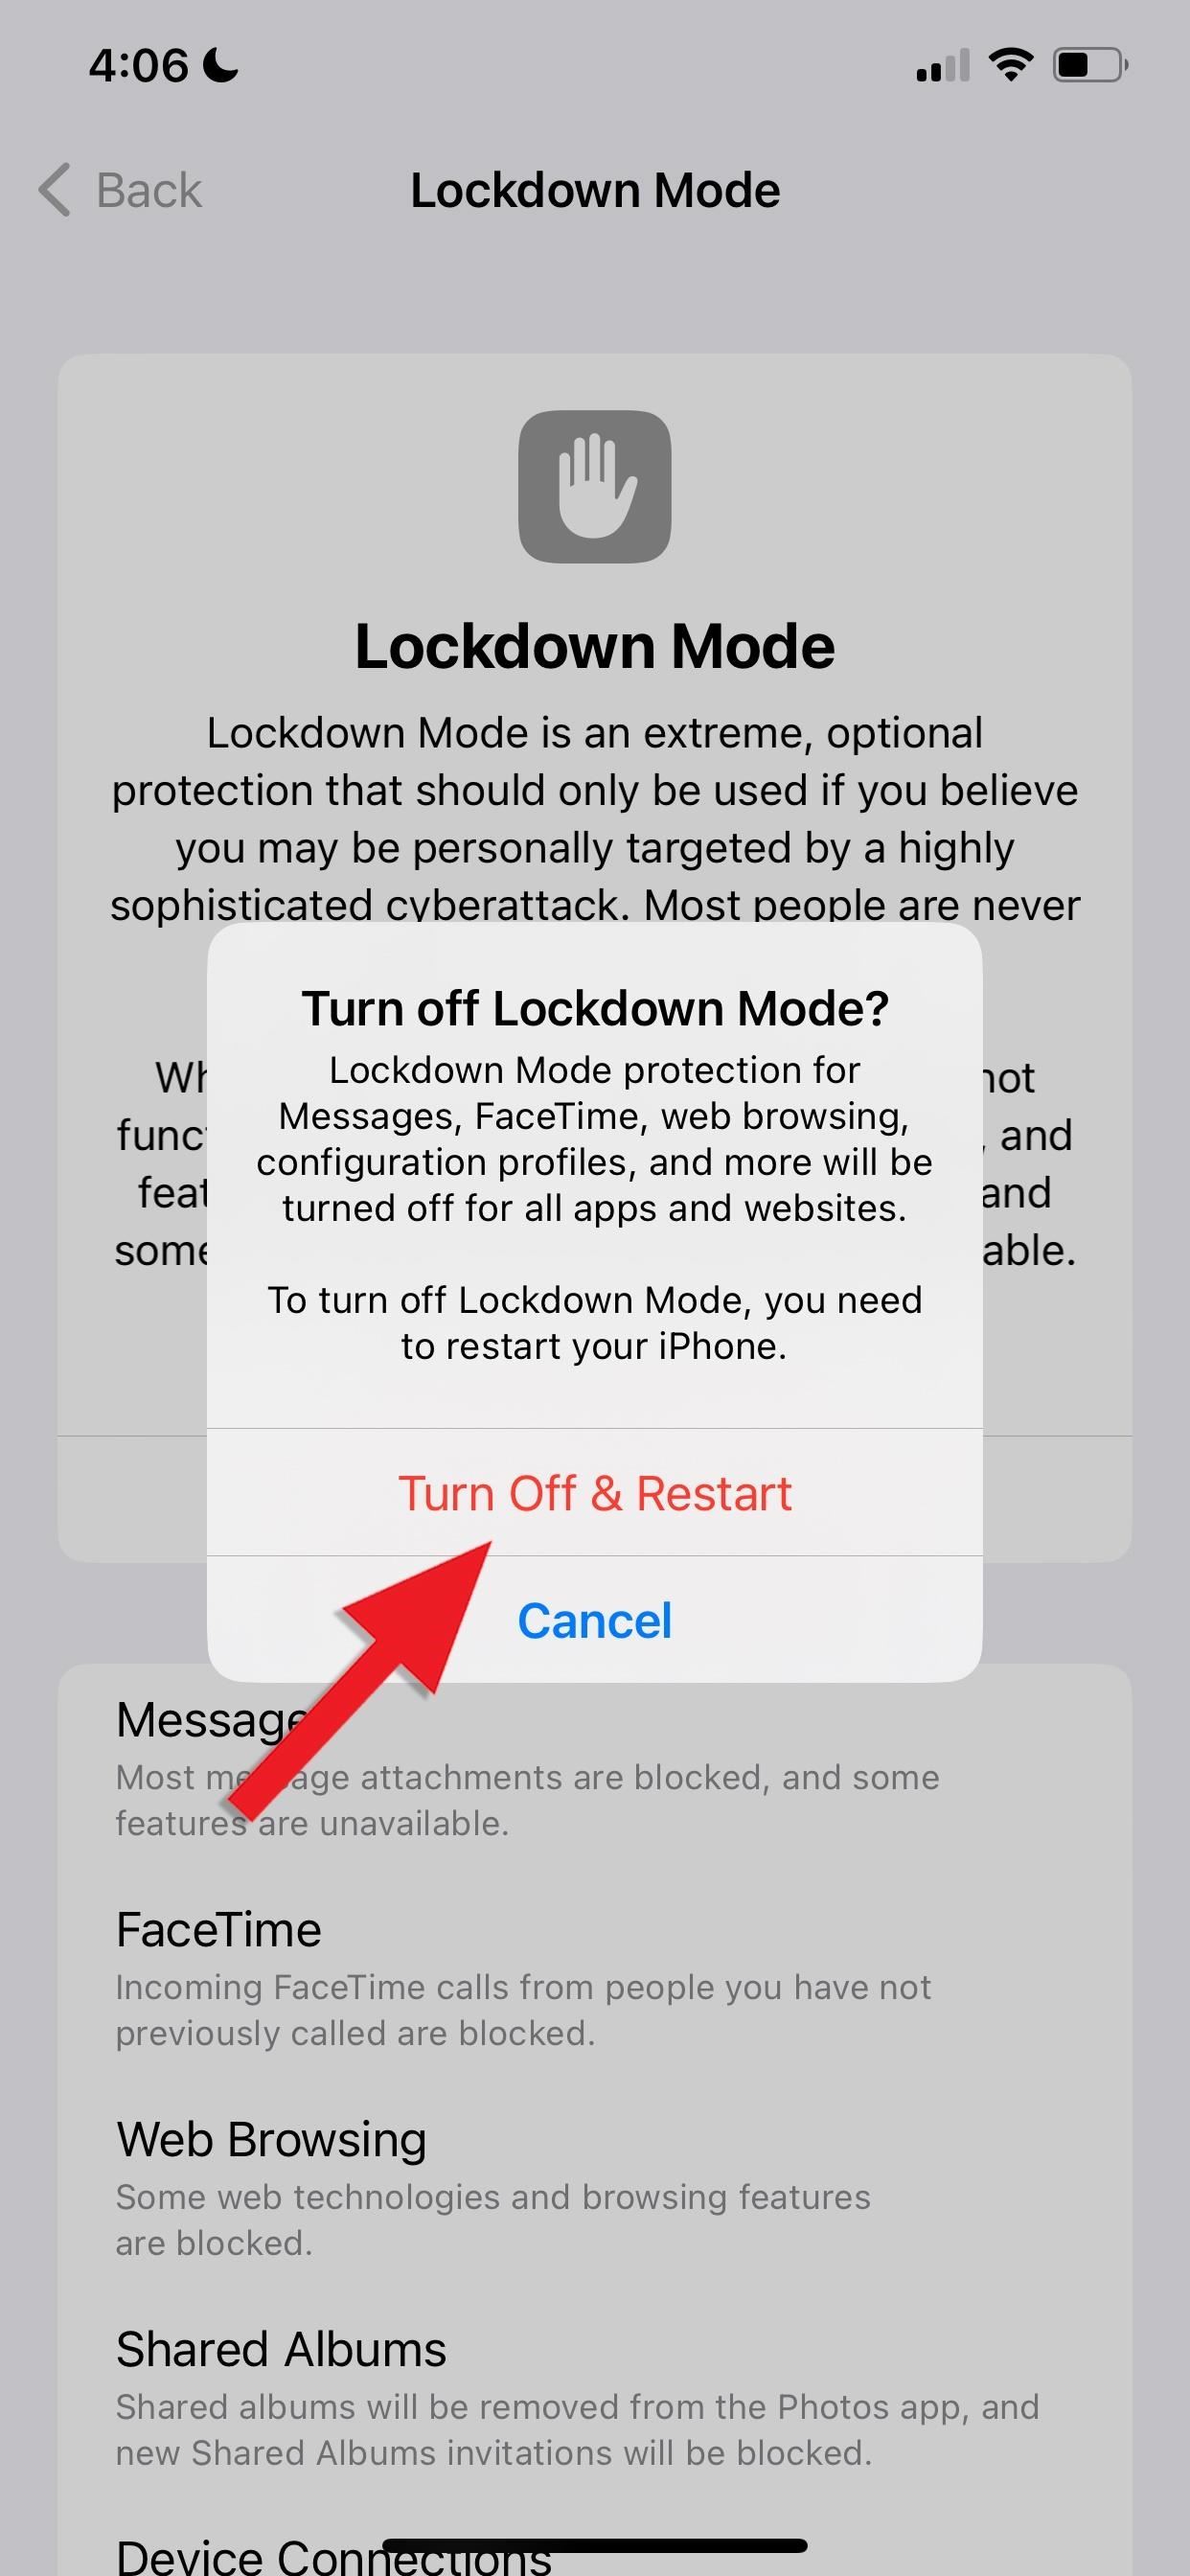 Lock Down Your iPhone for Protection Against Spyware and Other Targeted Cyberattacks